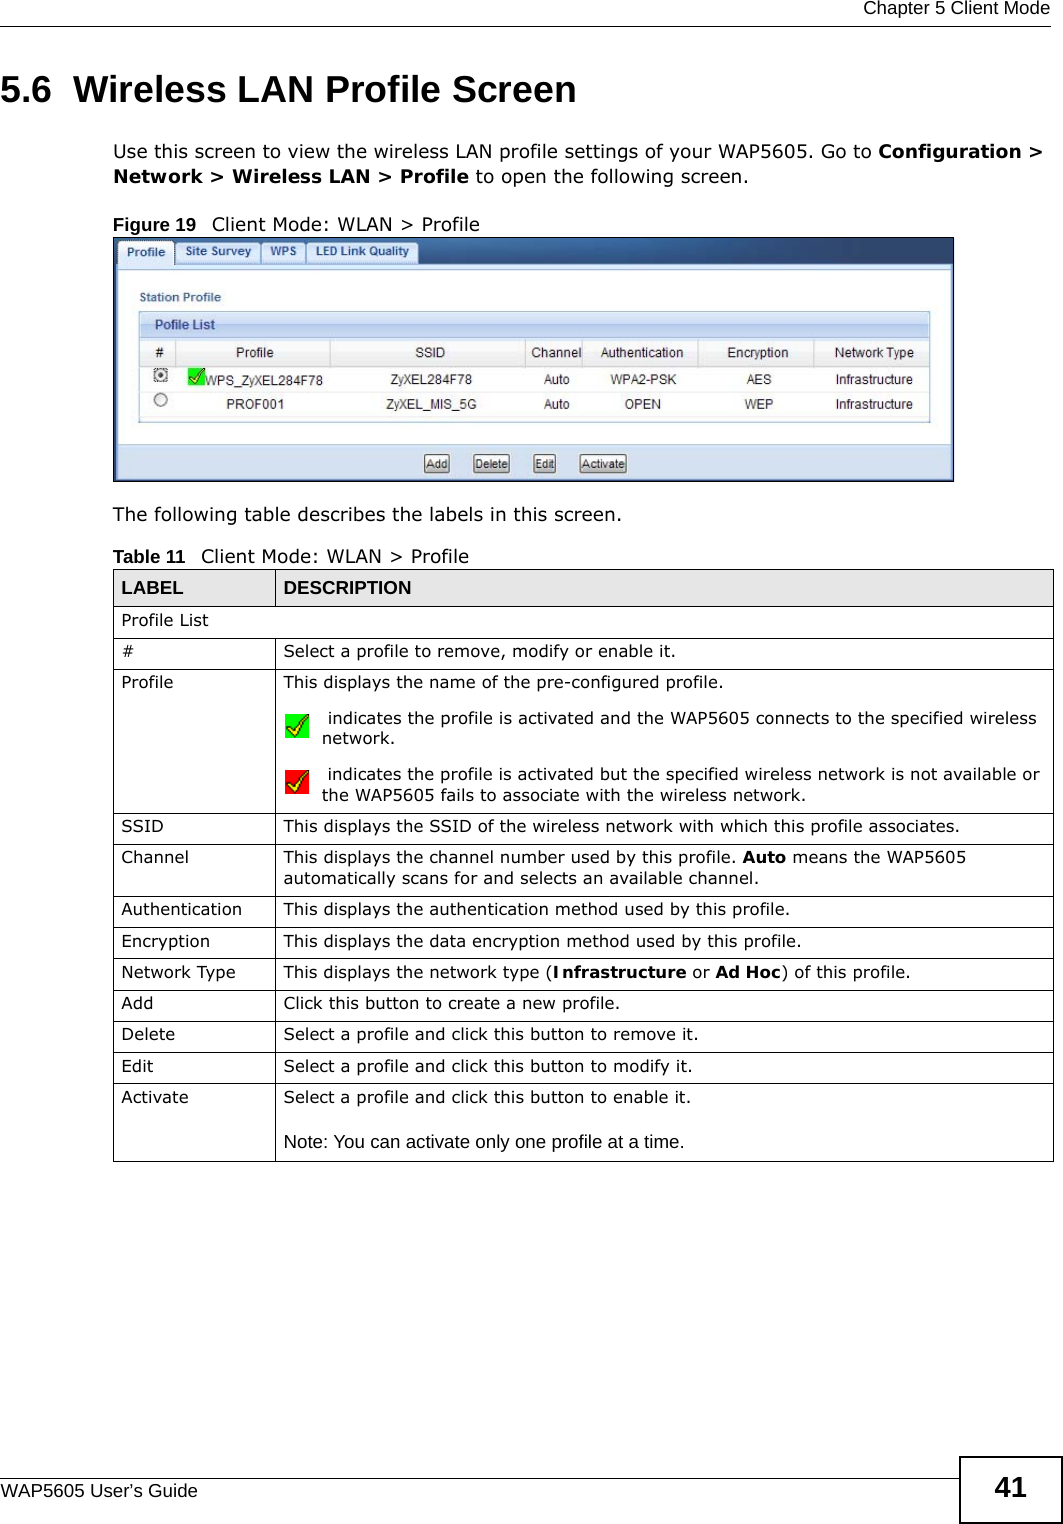  Chapter 5 Client ModeWAP5605 User’s Guide 415.6  Wireless LAN Profile ScreenUse this screen to view the wireless LAN profile settings of your WAP5605. Go to Configuration &gt; Network &gt; Wireless LAN &gt; Profile to open the following screen.Figure 19   Client Mode: WLAN &gt; ProfileThe following table describes the labels in this screen. Table 11   Client Mode: WLAN &gt; ProfileLABEL  DESCRIPTIONProfile List# Select a profile to remove, modify or enable it.Profile This displays the name of the pre-configured profile. indicates the profile is activated and the WAP5605 connects to the specified wireless network. indicates the profile is activated but the specified wireless network is not available or the WAP5605 fails to associate with the wireless network.SSID This displays the SSID of the wireless network with which this profile associates.Channel This displays the channel number used by this profile. Auto means the WAP5605 automatically scans for and selects an available channel.Authentication This displays the authentication method used by this profile.Encryption This displays the data encryption method used by this profile.Network Type This displays the network type (Infrastructure or Ad Hoc) of this profile.Add Click this button to create a new profile.Delete Select a profile and click this button to remove it.Edit Select a profile and click this button to modify it.Activate Select a profile and click this button to enable it.Note: You can activate only one profile at a time.